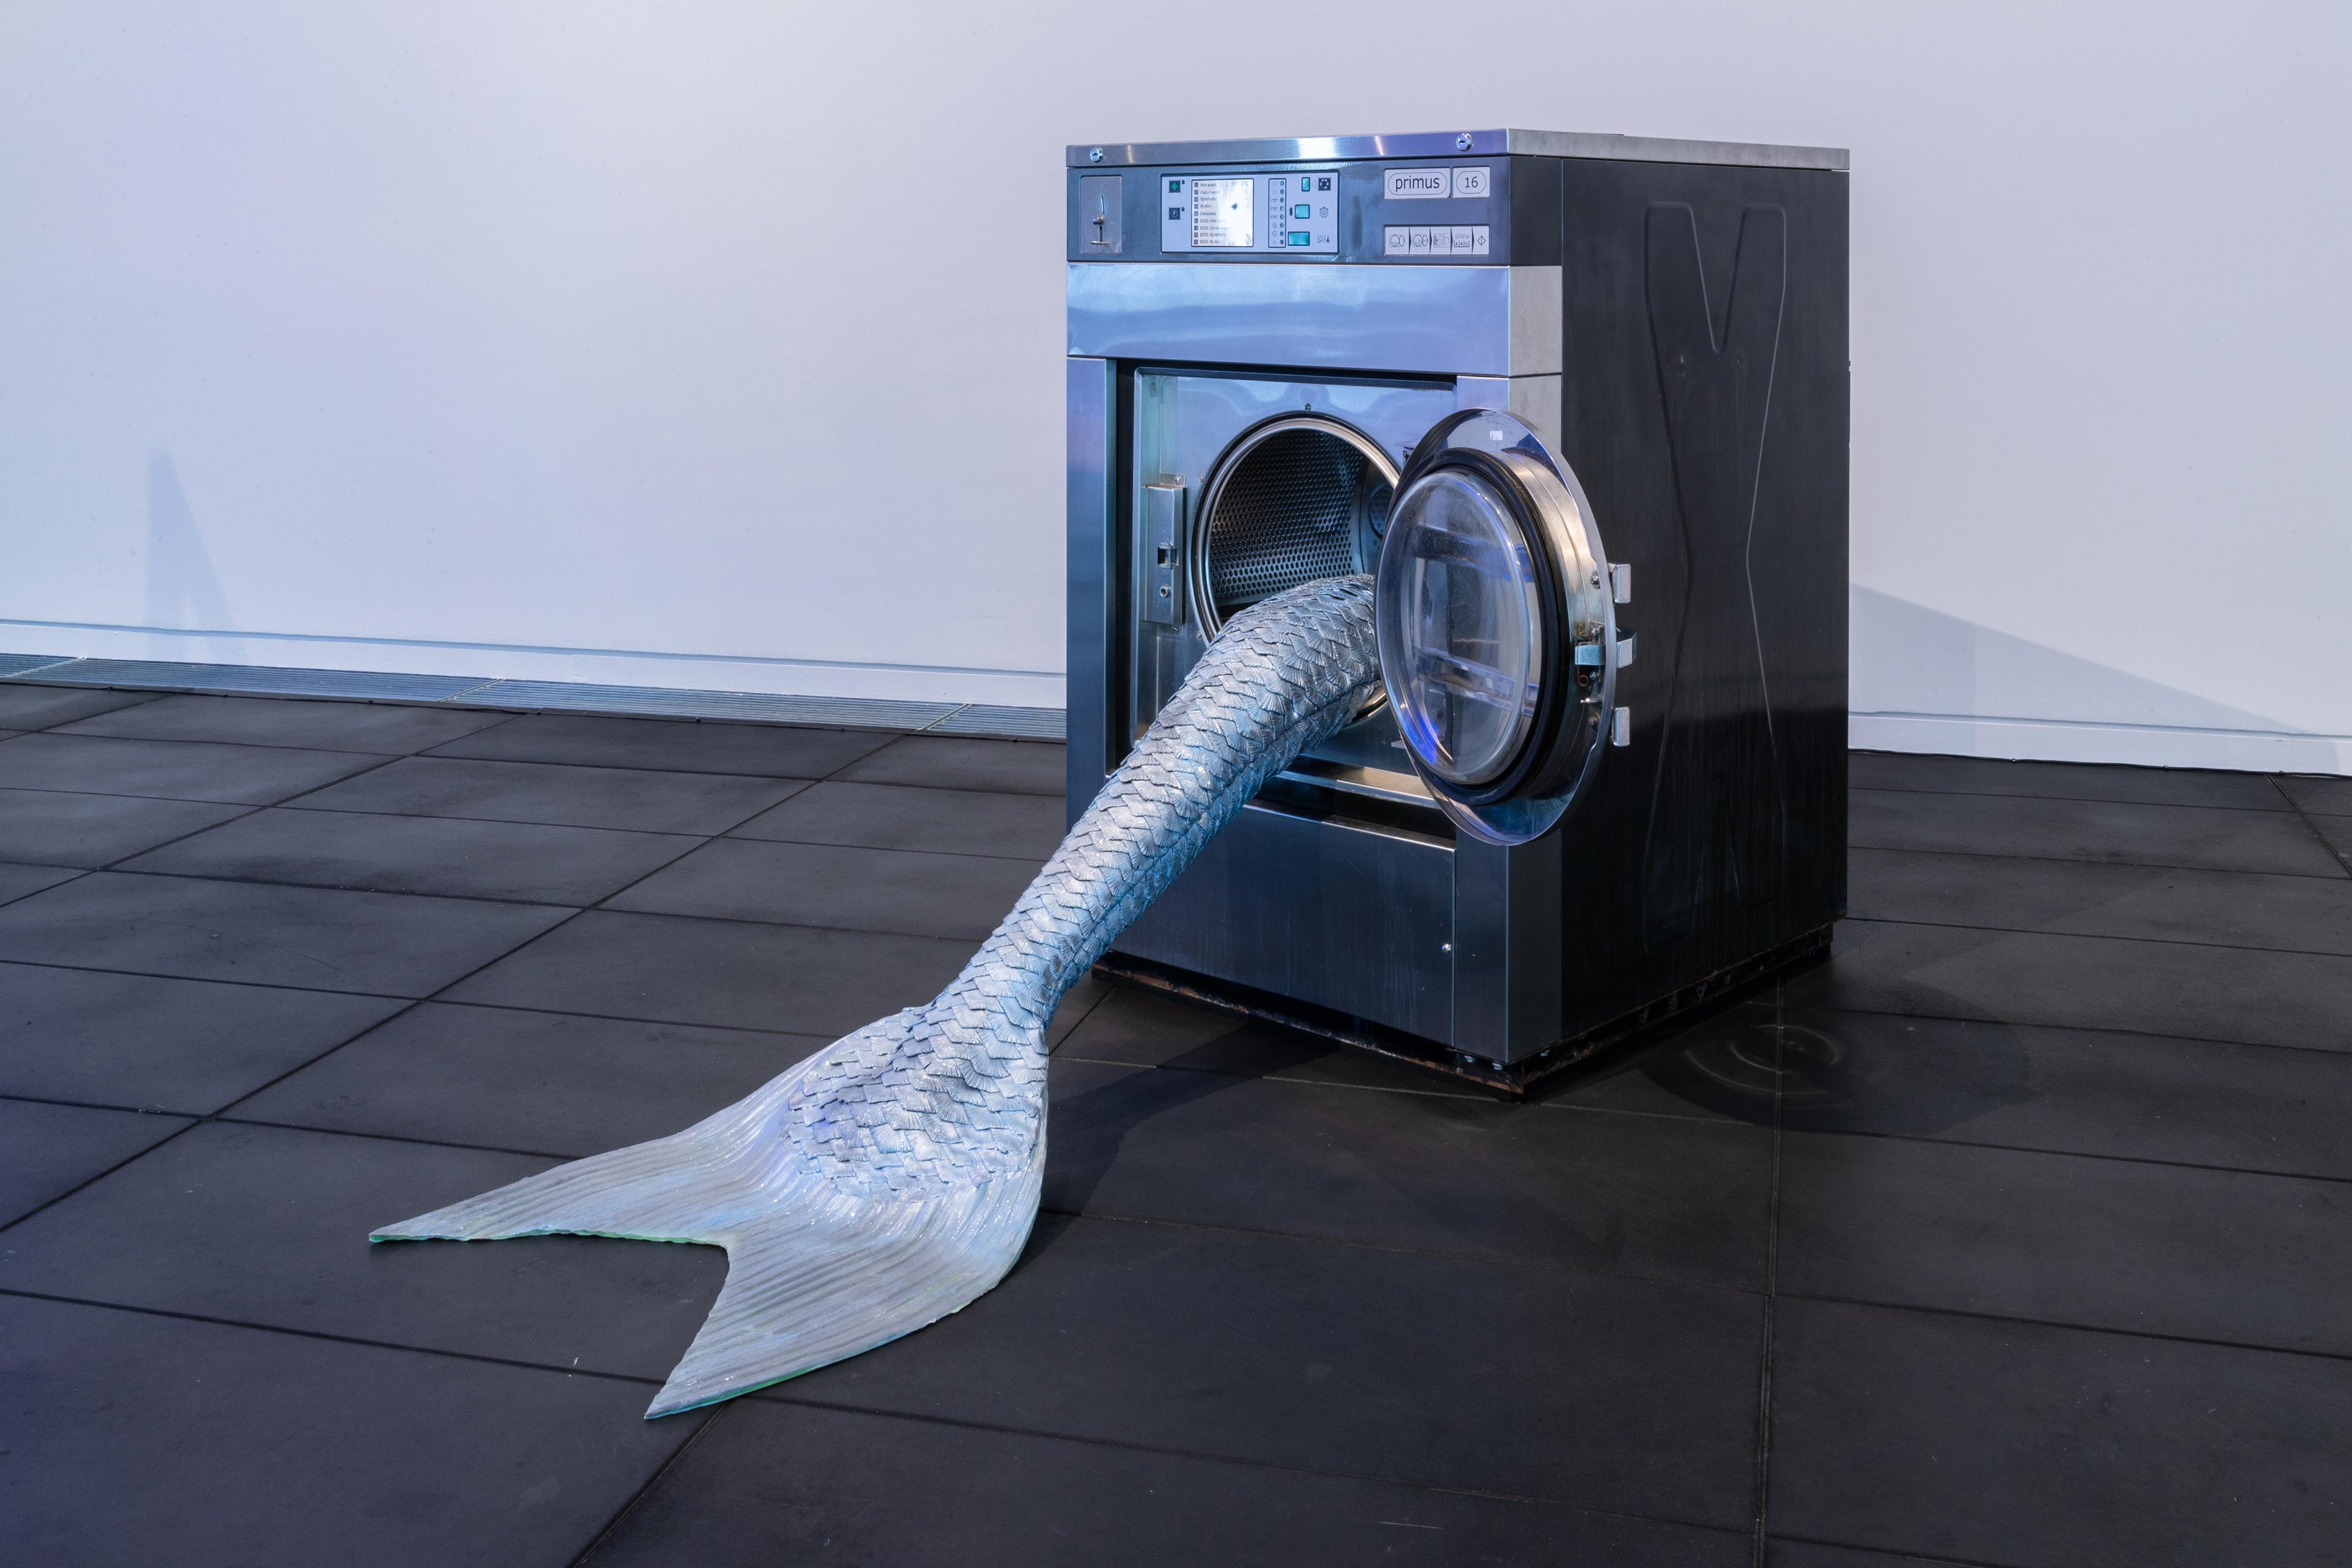 Olivia Erlanger, Pergusa (Gris), 2022, silicone and paint, commercial washing machine, courtesy of the artist and DM Office, New York. Installation view, Megan Dunn: The Mermaid Chronicles, Te Pātaka Toi Adam Art Gallery, Te Herenga Waka Victoria University of Wellington, 2022. Photo: Ted Whitaker